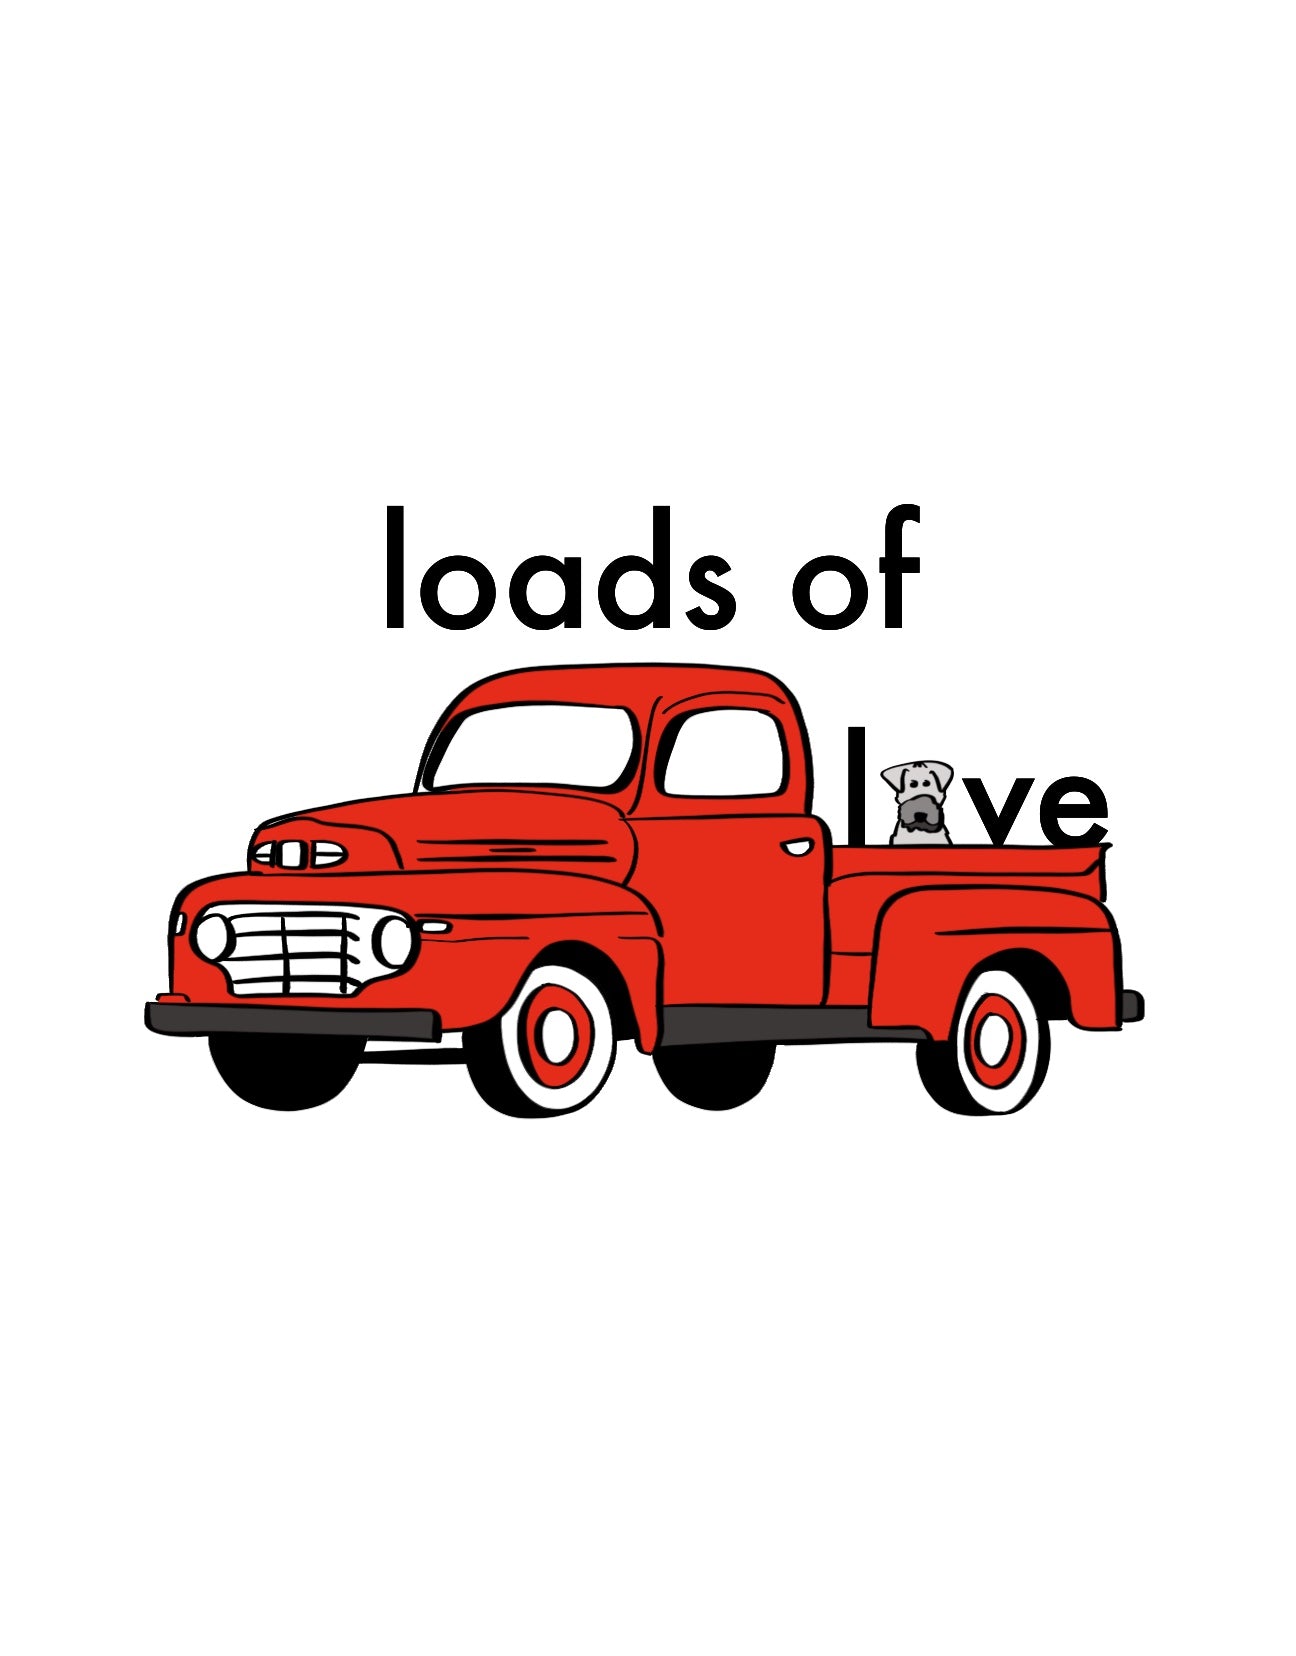 “Loads of Love” is one of our best selling greeting cards and features an adorable dog in the bed of a vintage bright red pickup truck.  If it weren't cute enough, the dog's head is the "o" in "love."  This card is perfect for any occasion.  All of our original artwork is created by Jennifer Knight.  NewWingStudio.com